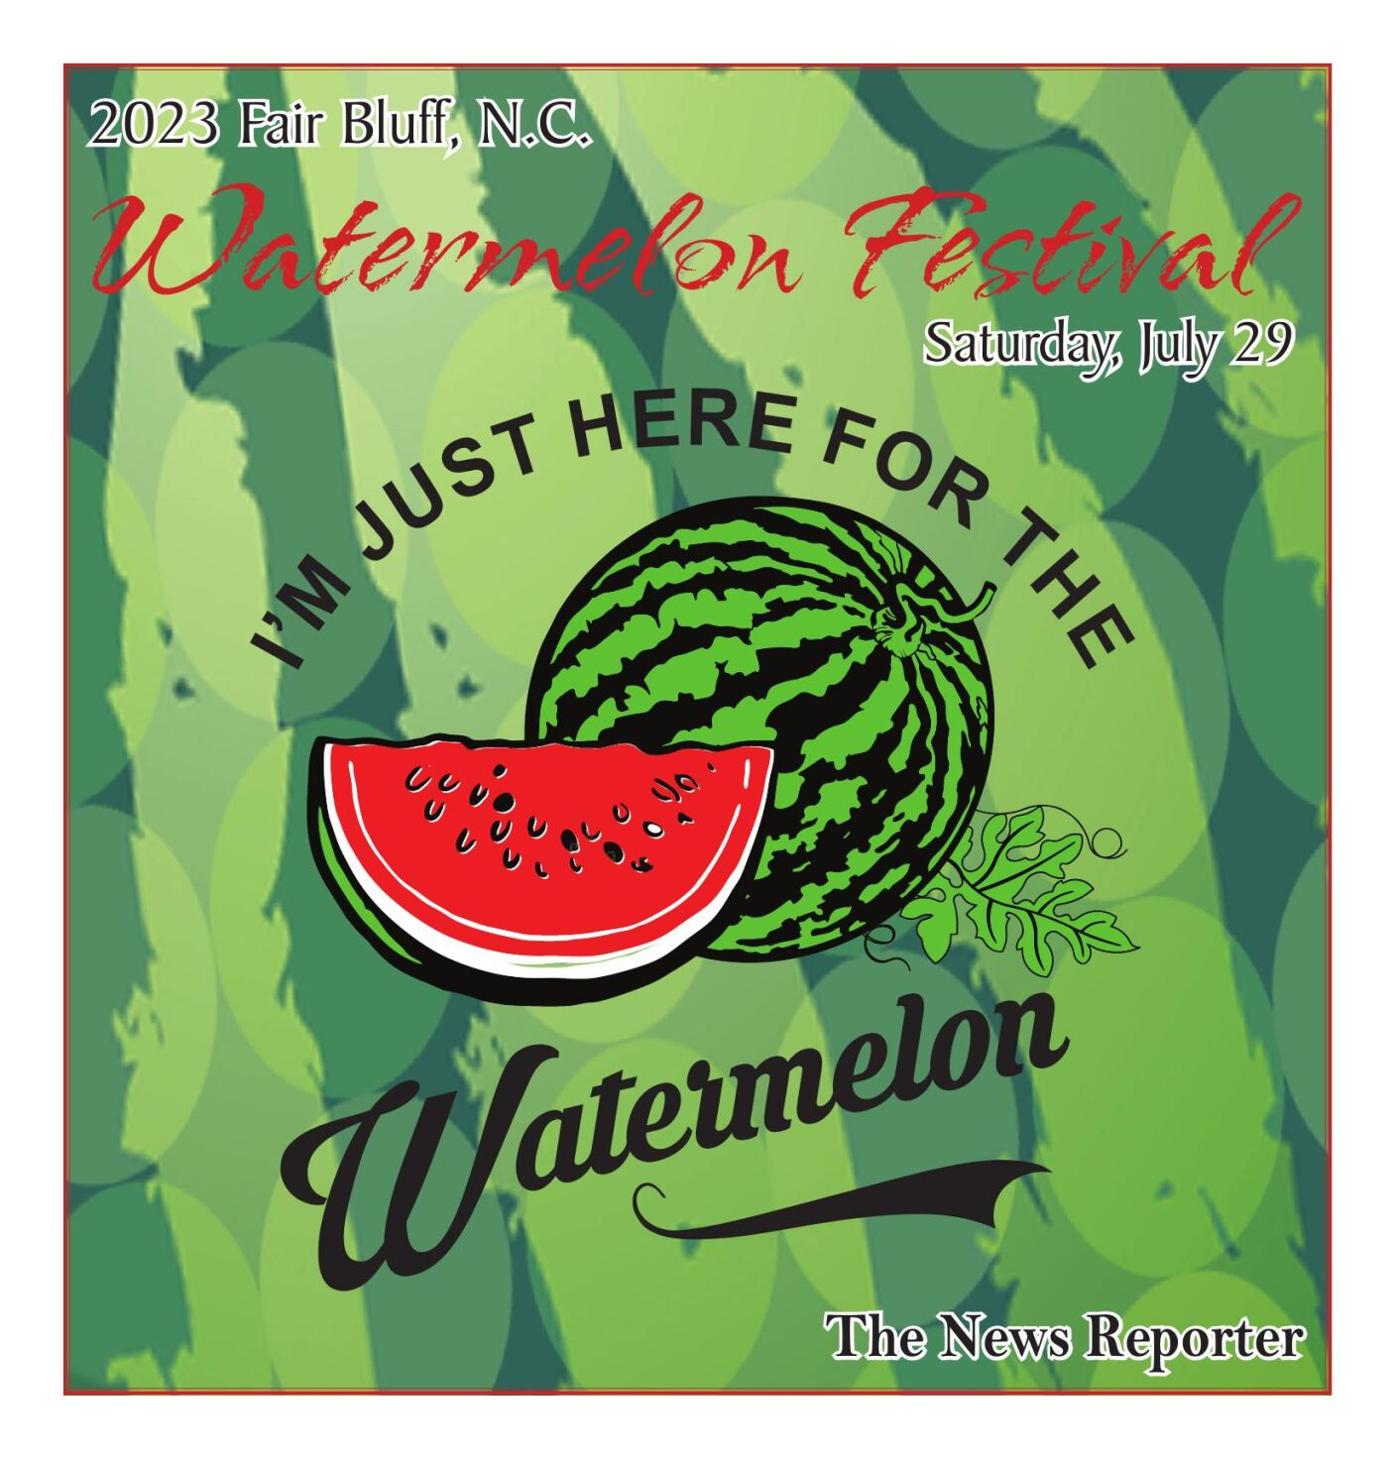 Your guide to the Fair Bluff Watermelon Festival! News